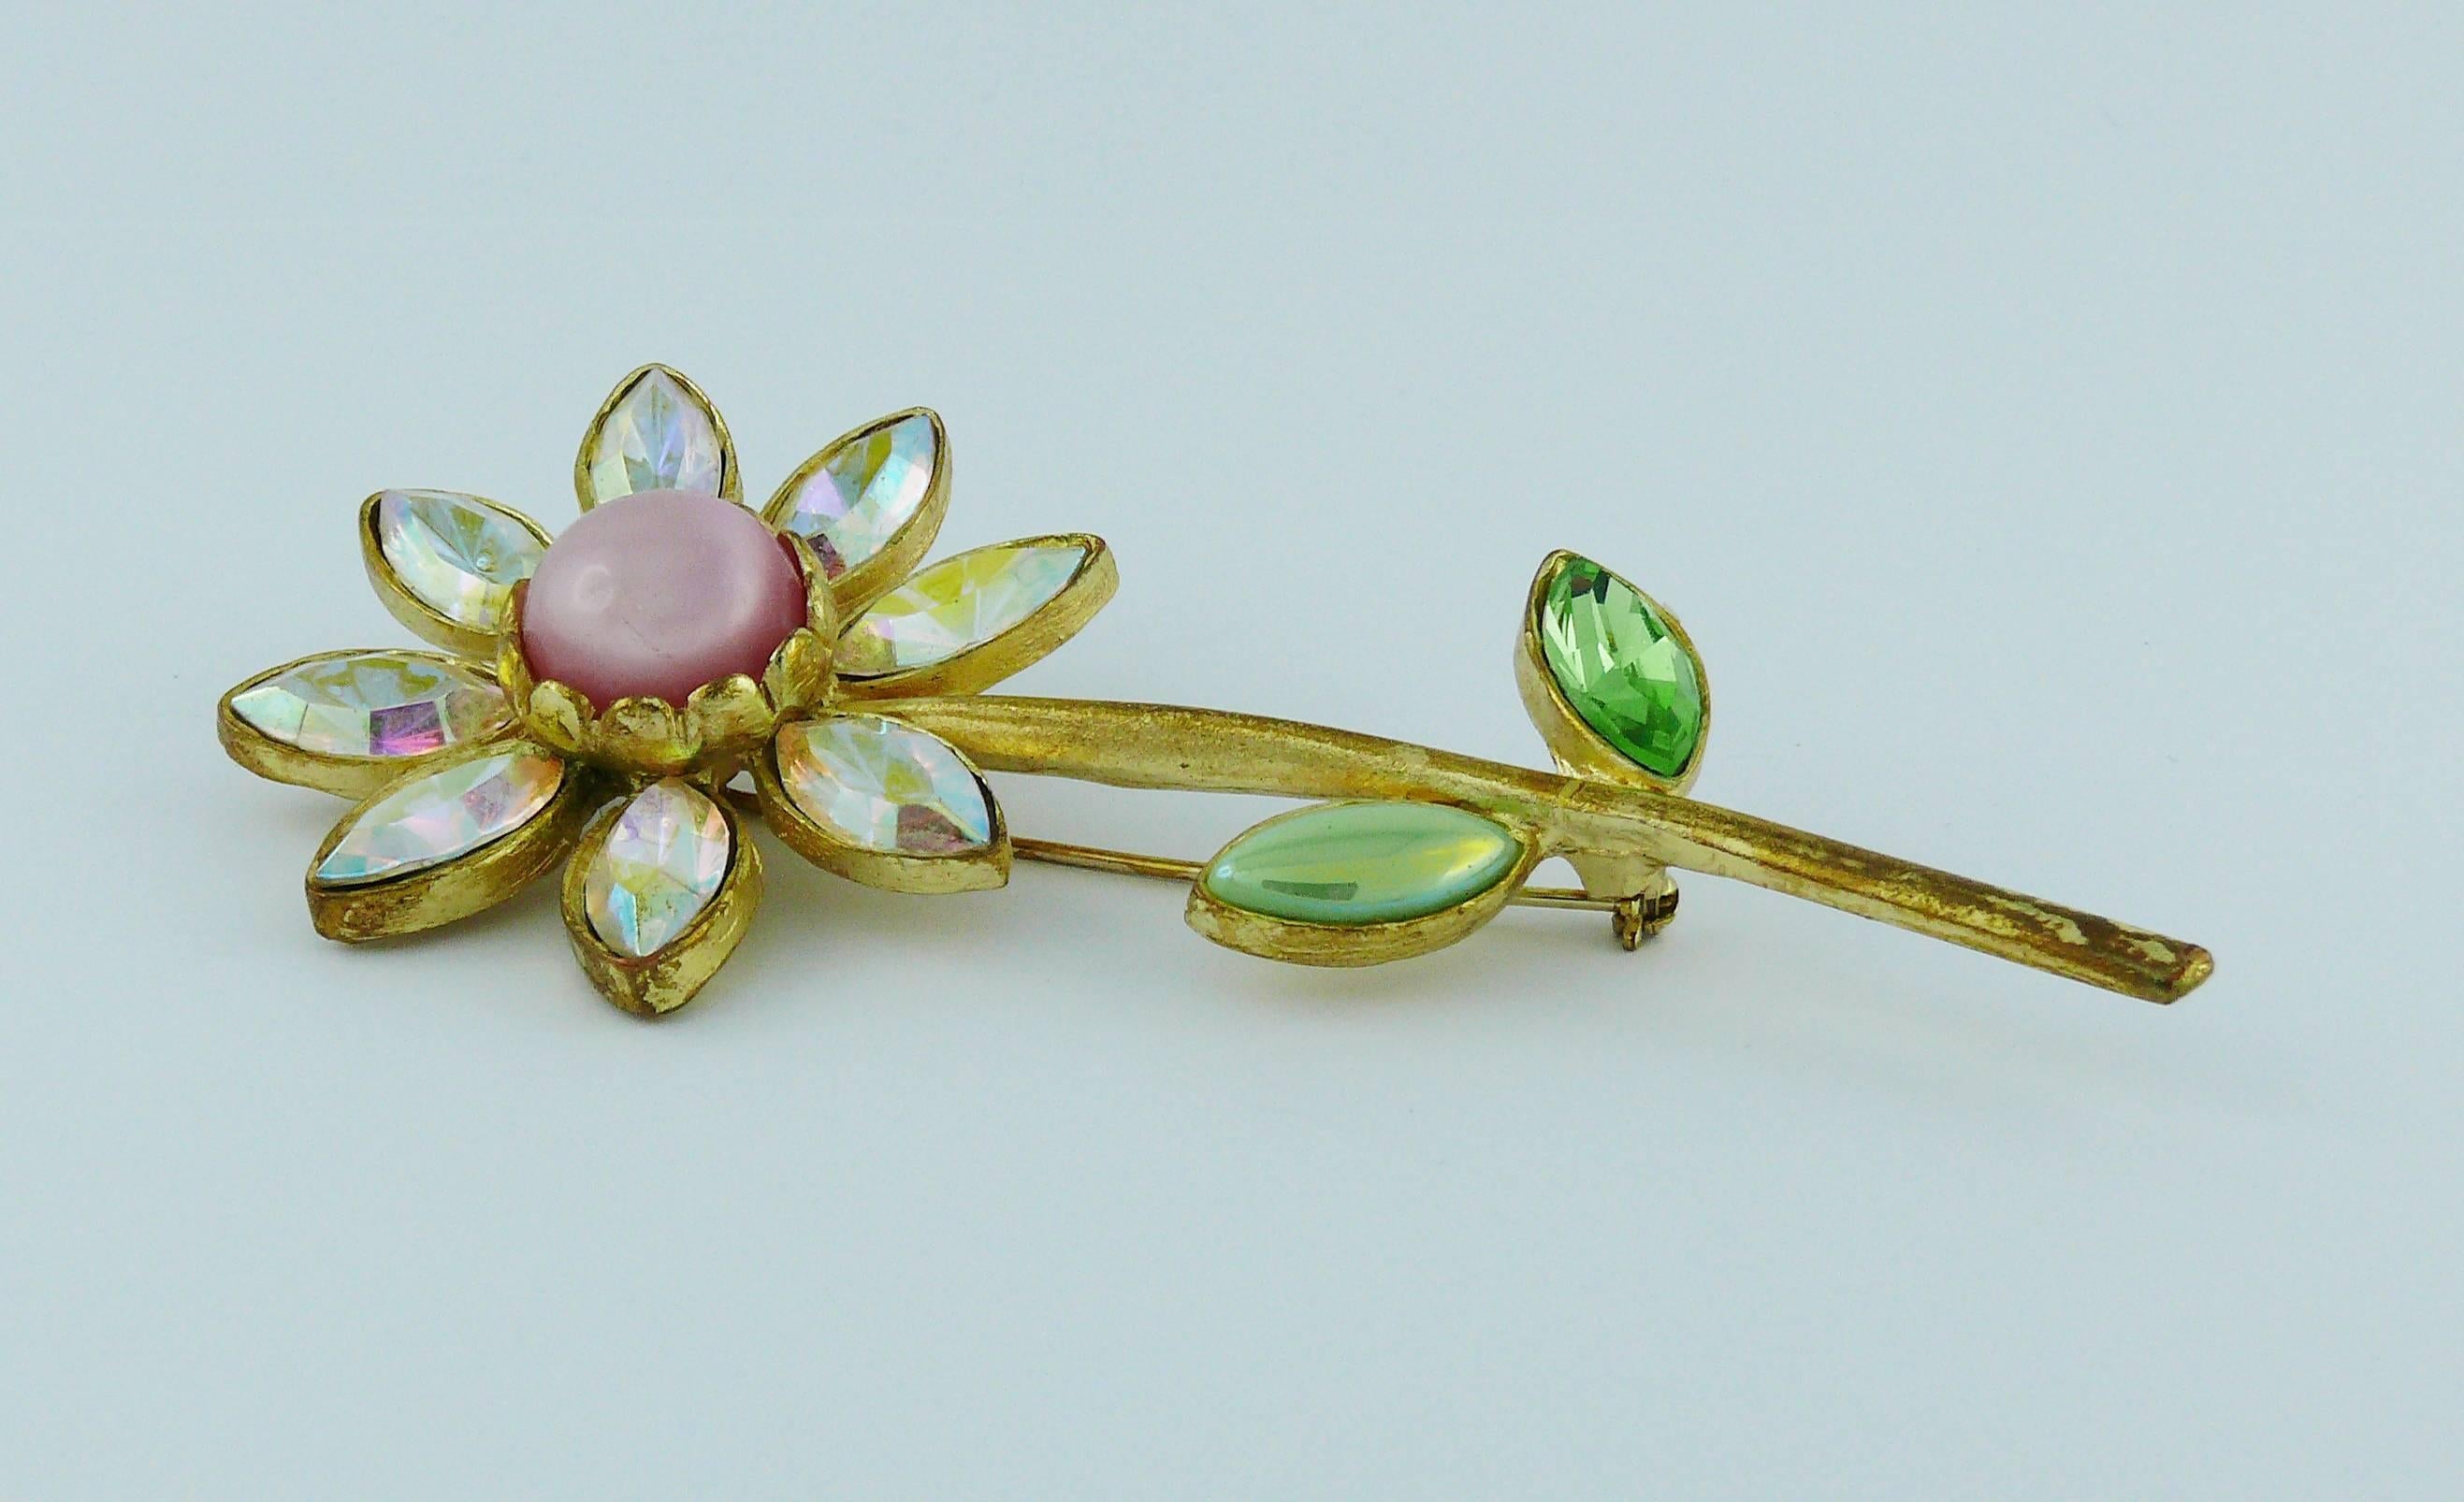 CHRISTIAN LACROIX vintage flower brooch embellished with crystals and glass cabochons.

Marked CHRISTIAN LACROIX CL Made in France.

Indicative measurements : height approx. 9.4 cm (3.70 inches) / max. width approx. 4.4 cm (1.73 inches).

JEWELRY